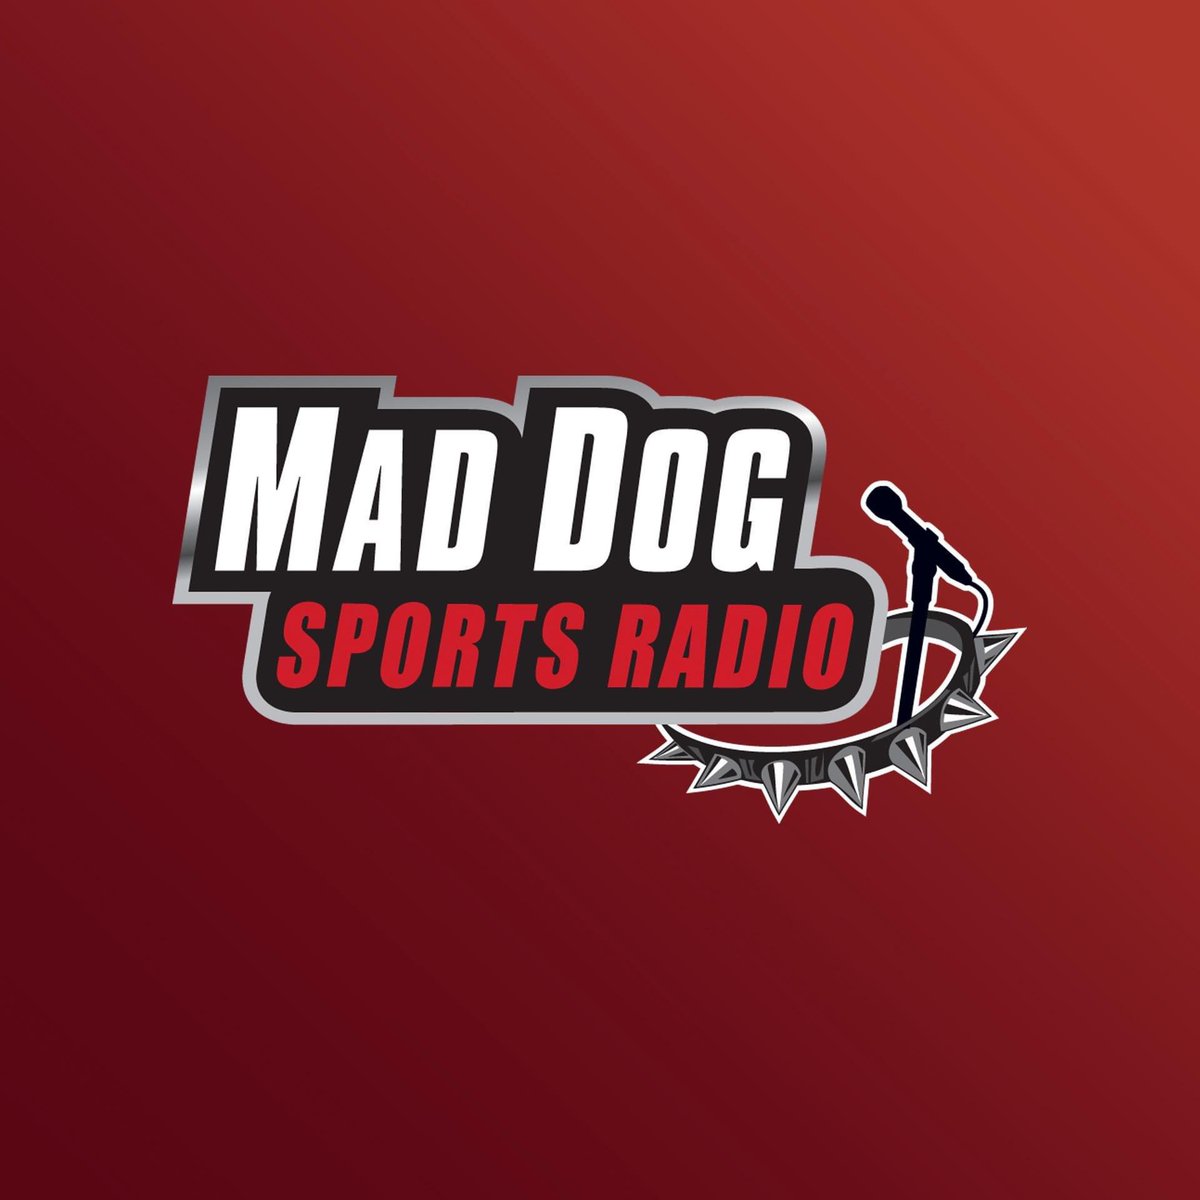 Start your sports Saturday with me on @MadDogRadio! I’m hosting from 8A-12P ET! We’ll be all over the Elite 8, huge Jets/Eagles trade, latest on NFL Draft, McNeil vs. Hoskins, Yankees 2-0 vs. Astros, and much more! Call in at 888-623-3646! Listen on @SIRIUSXM channel 82!